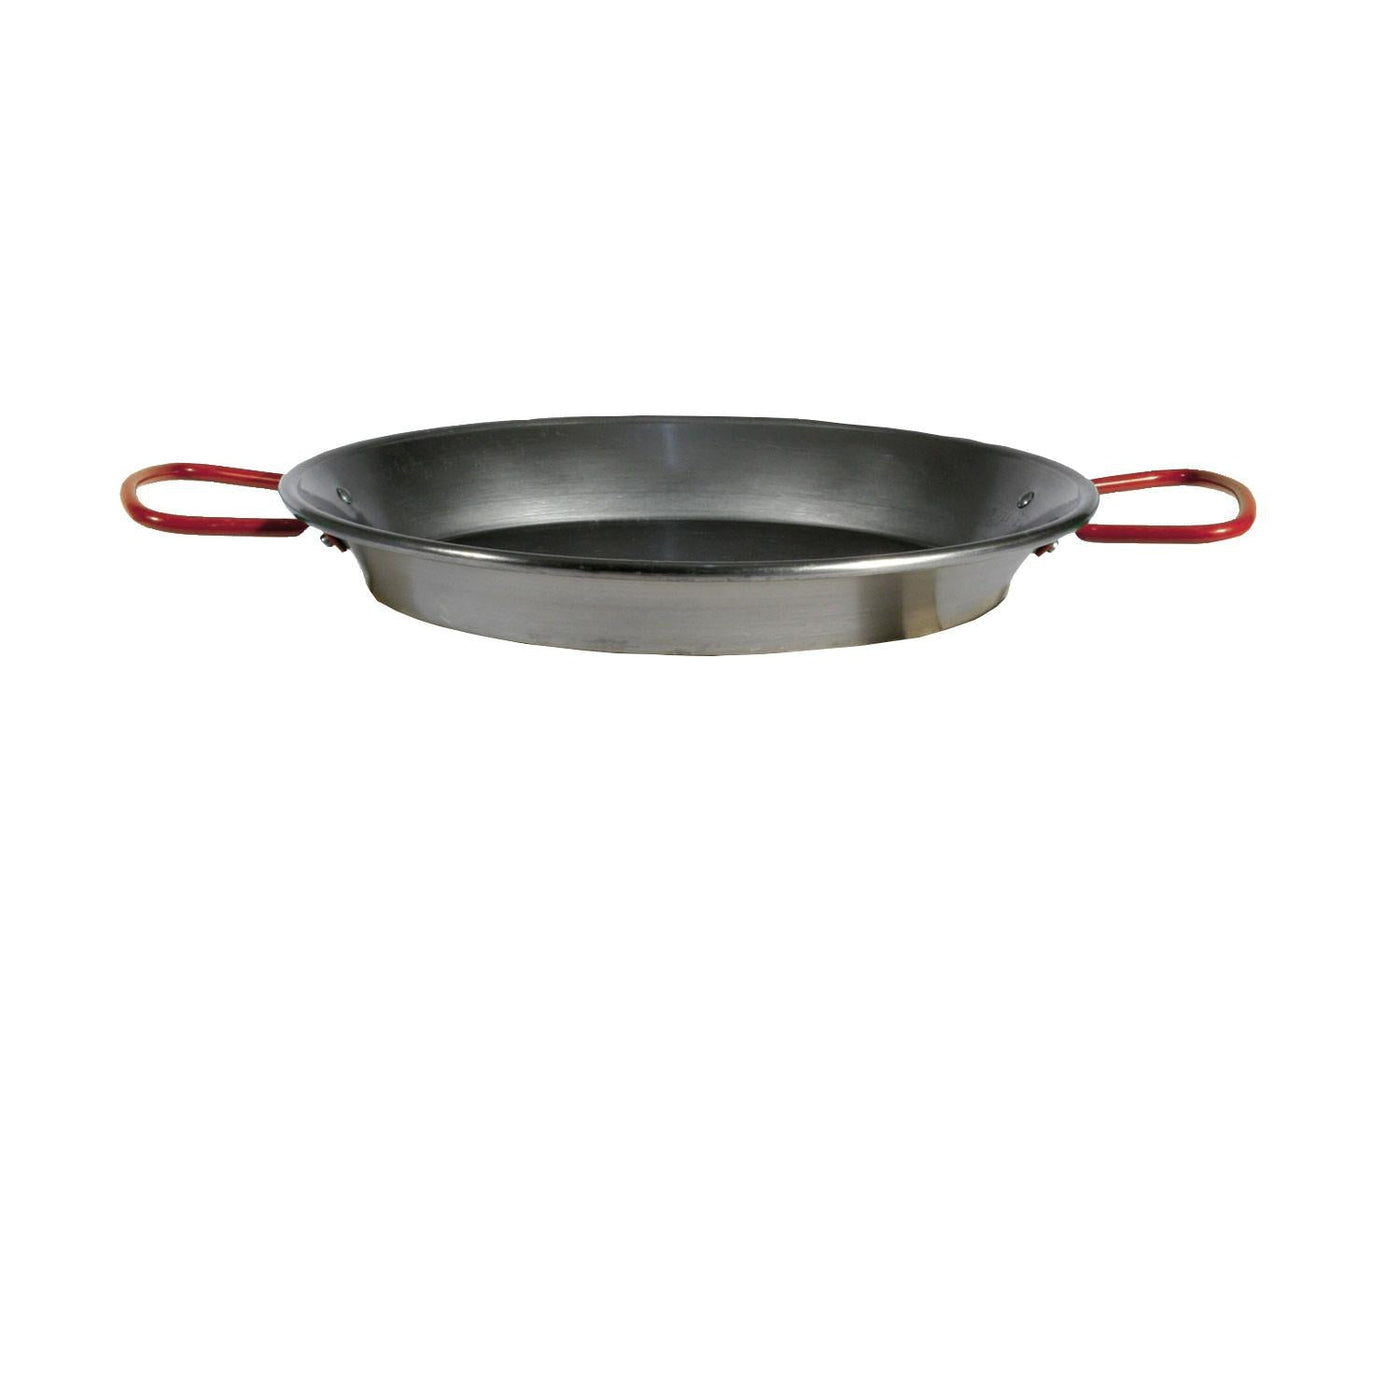 Kraul Fire Bowl Accessories - Pan with Handles-Camping & Hiking-Kraul-Yes Bebe